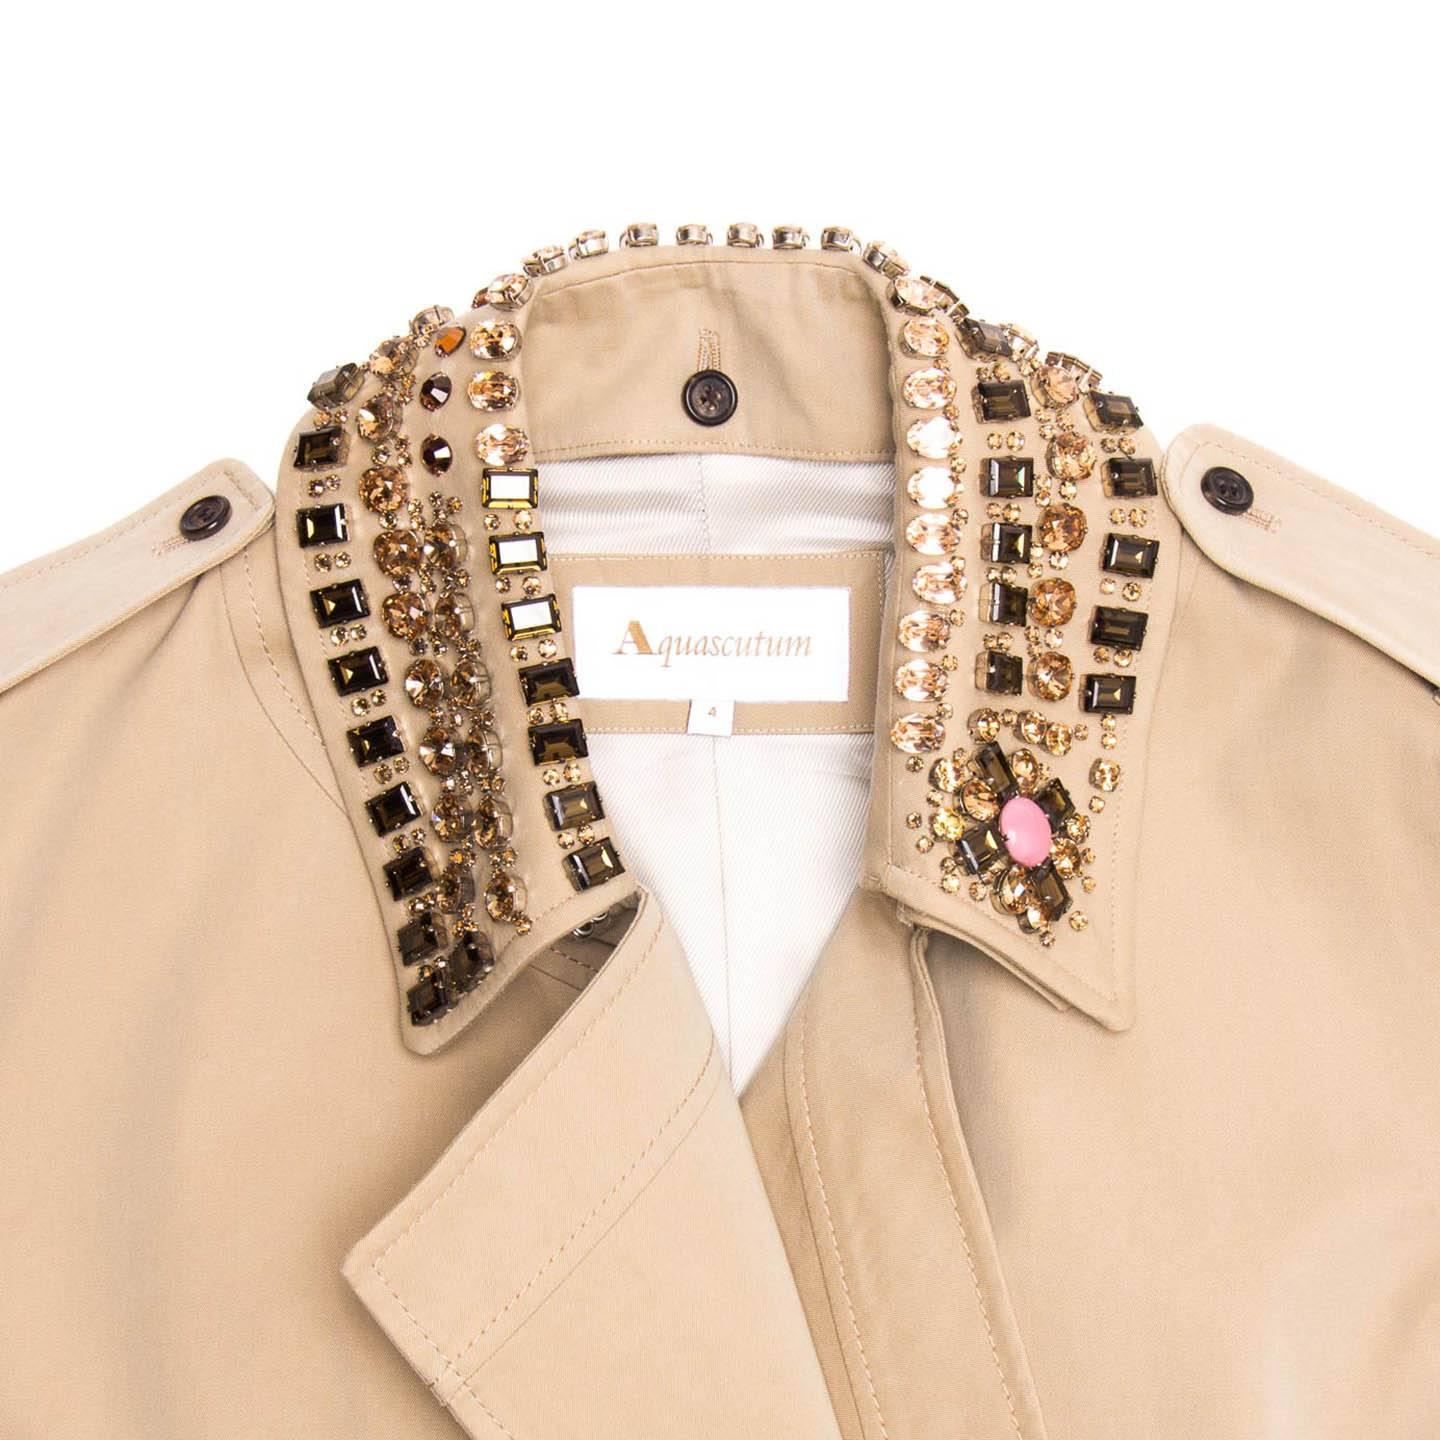 Aquascutum Khaki Jewel Collar Trench Coat In New Condition For Sale In Brooklyn, NY